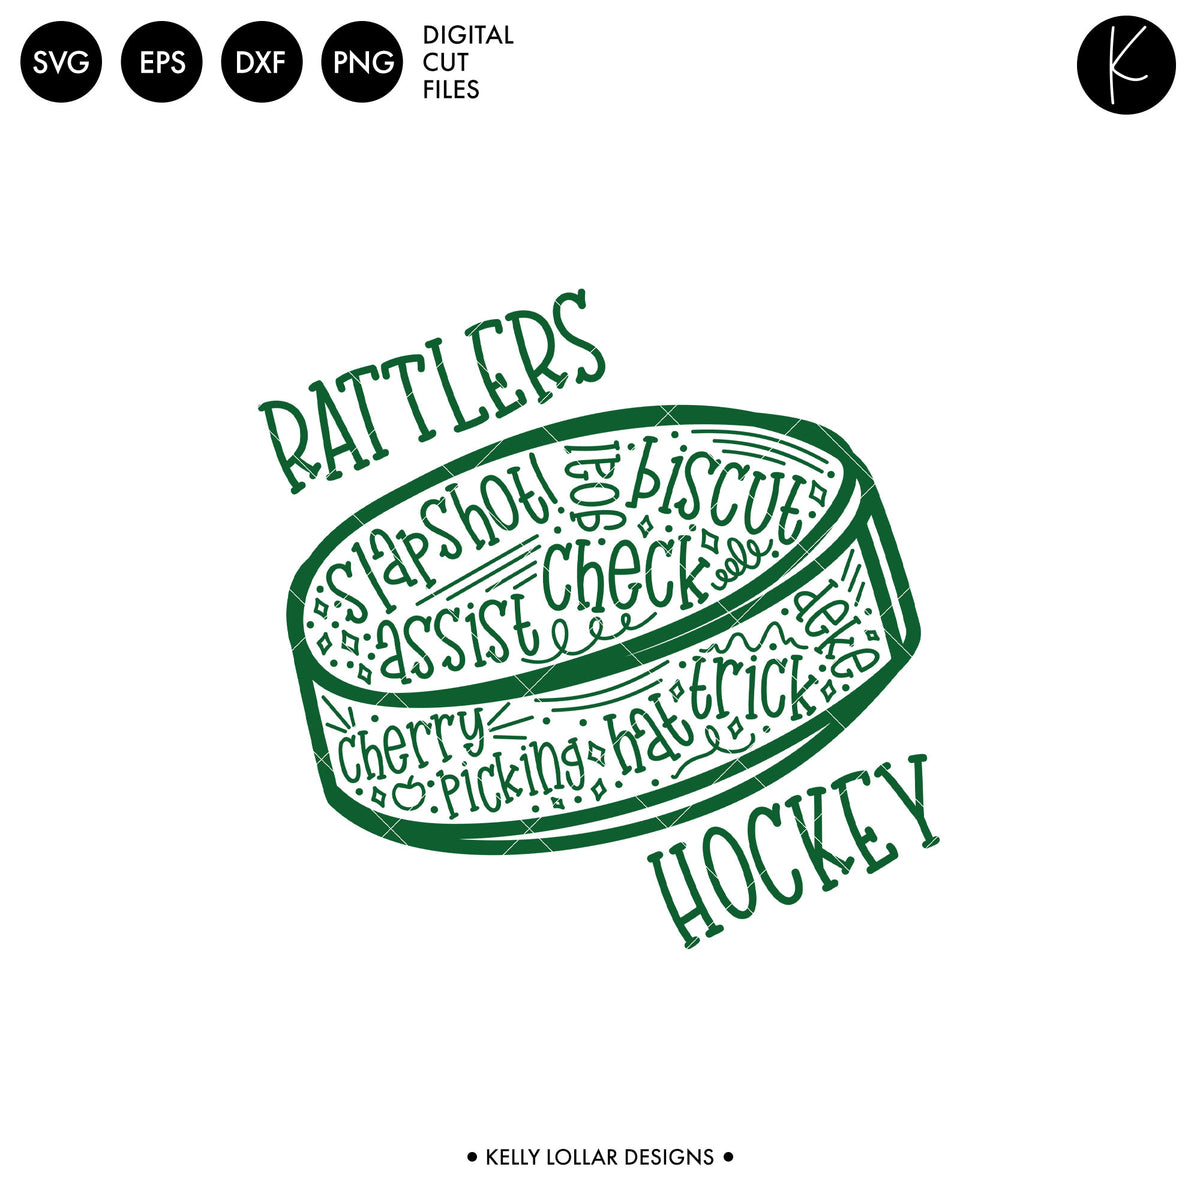 Rattlers Hockey Bundle | SVG DXF EPS PNG Cut Files